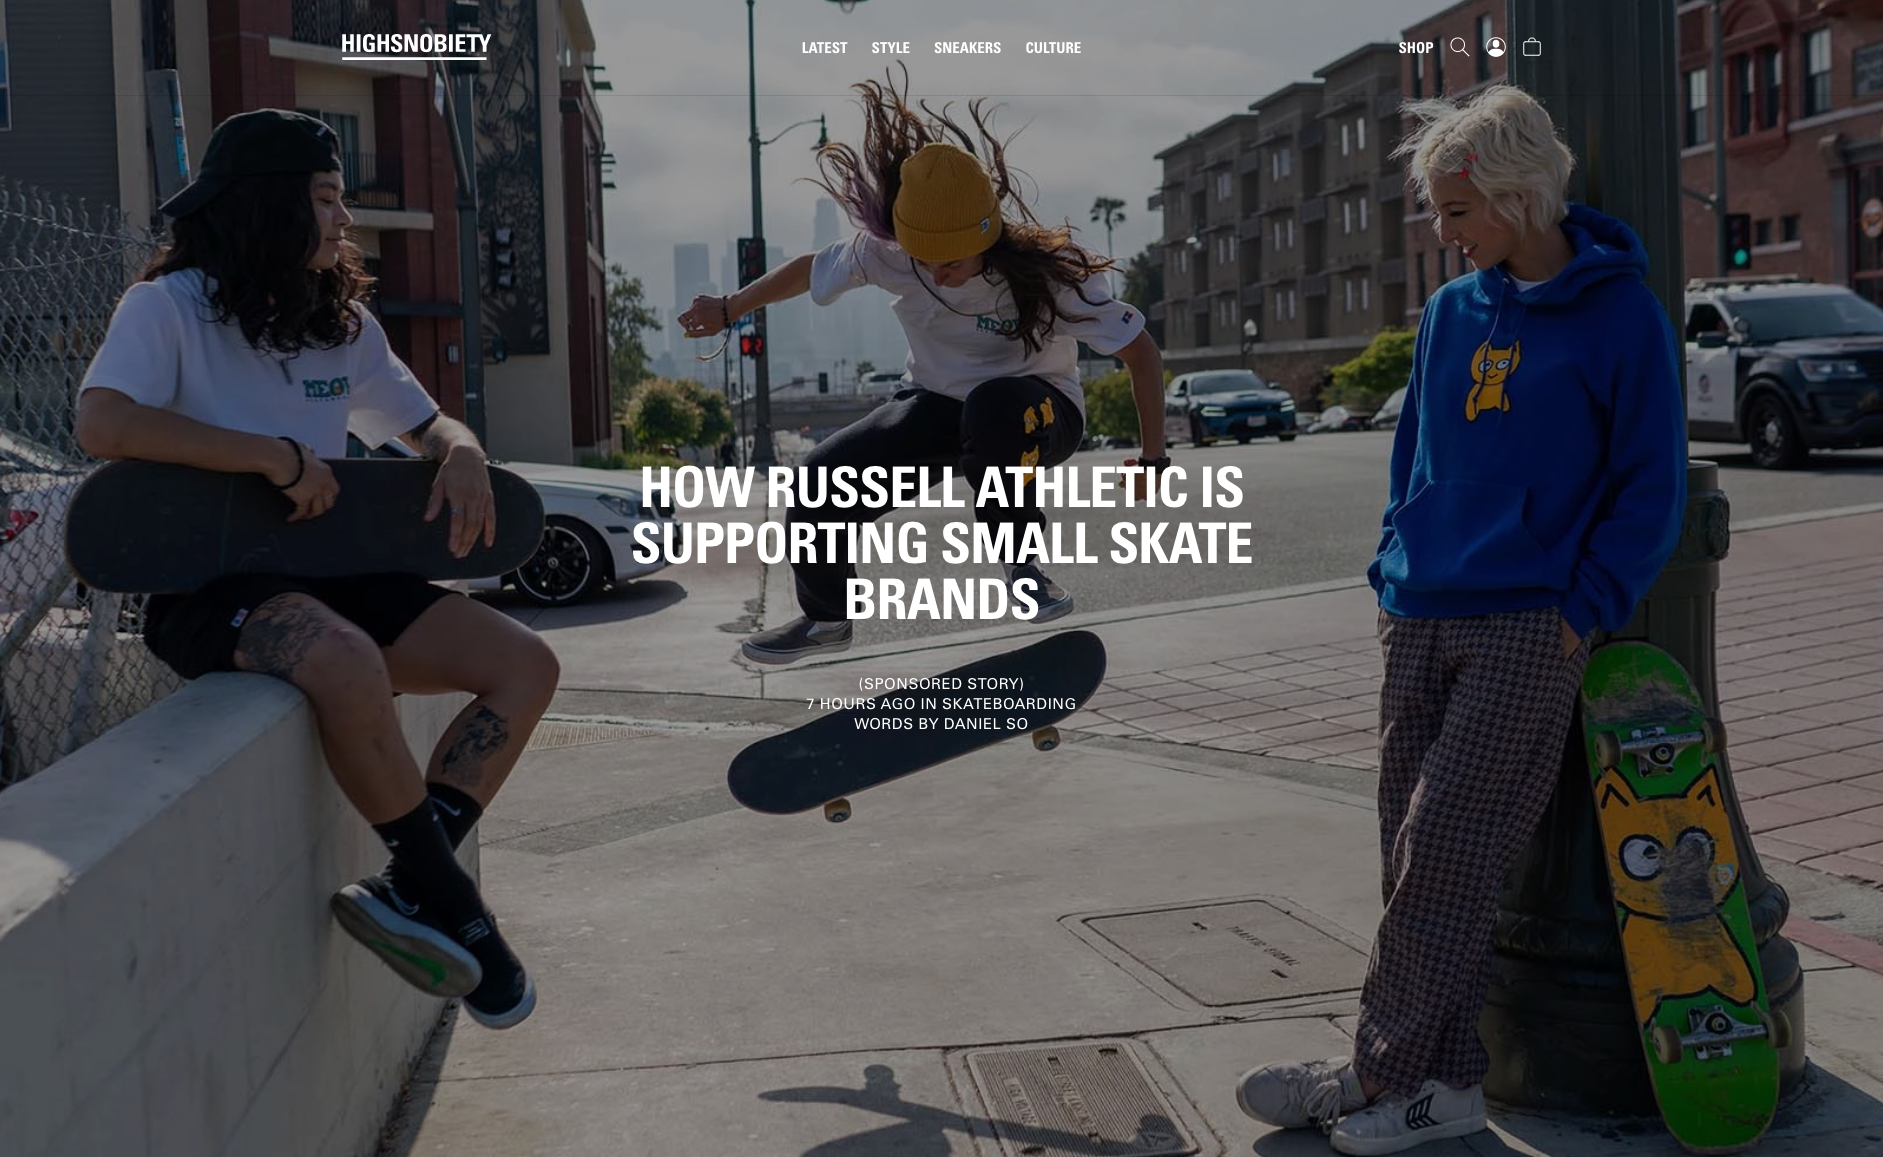 Meow Skateboards x Russell Athletic